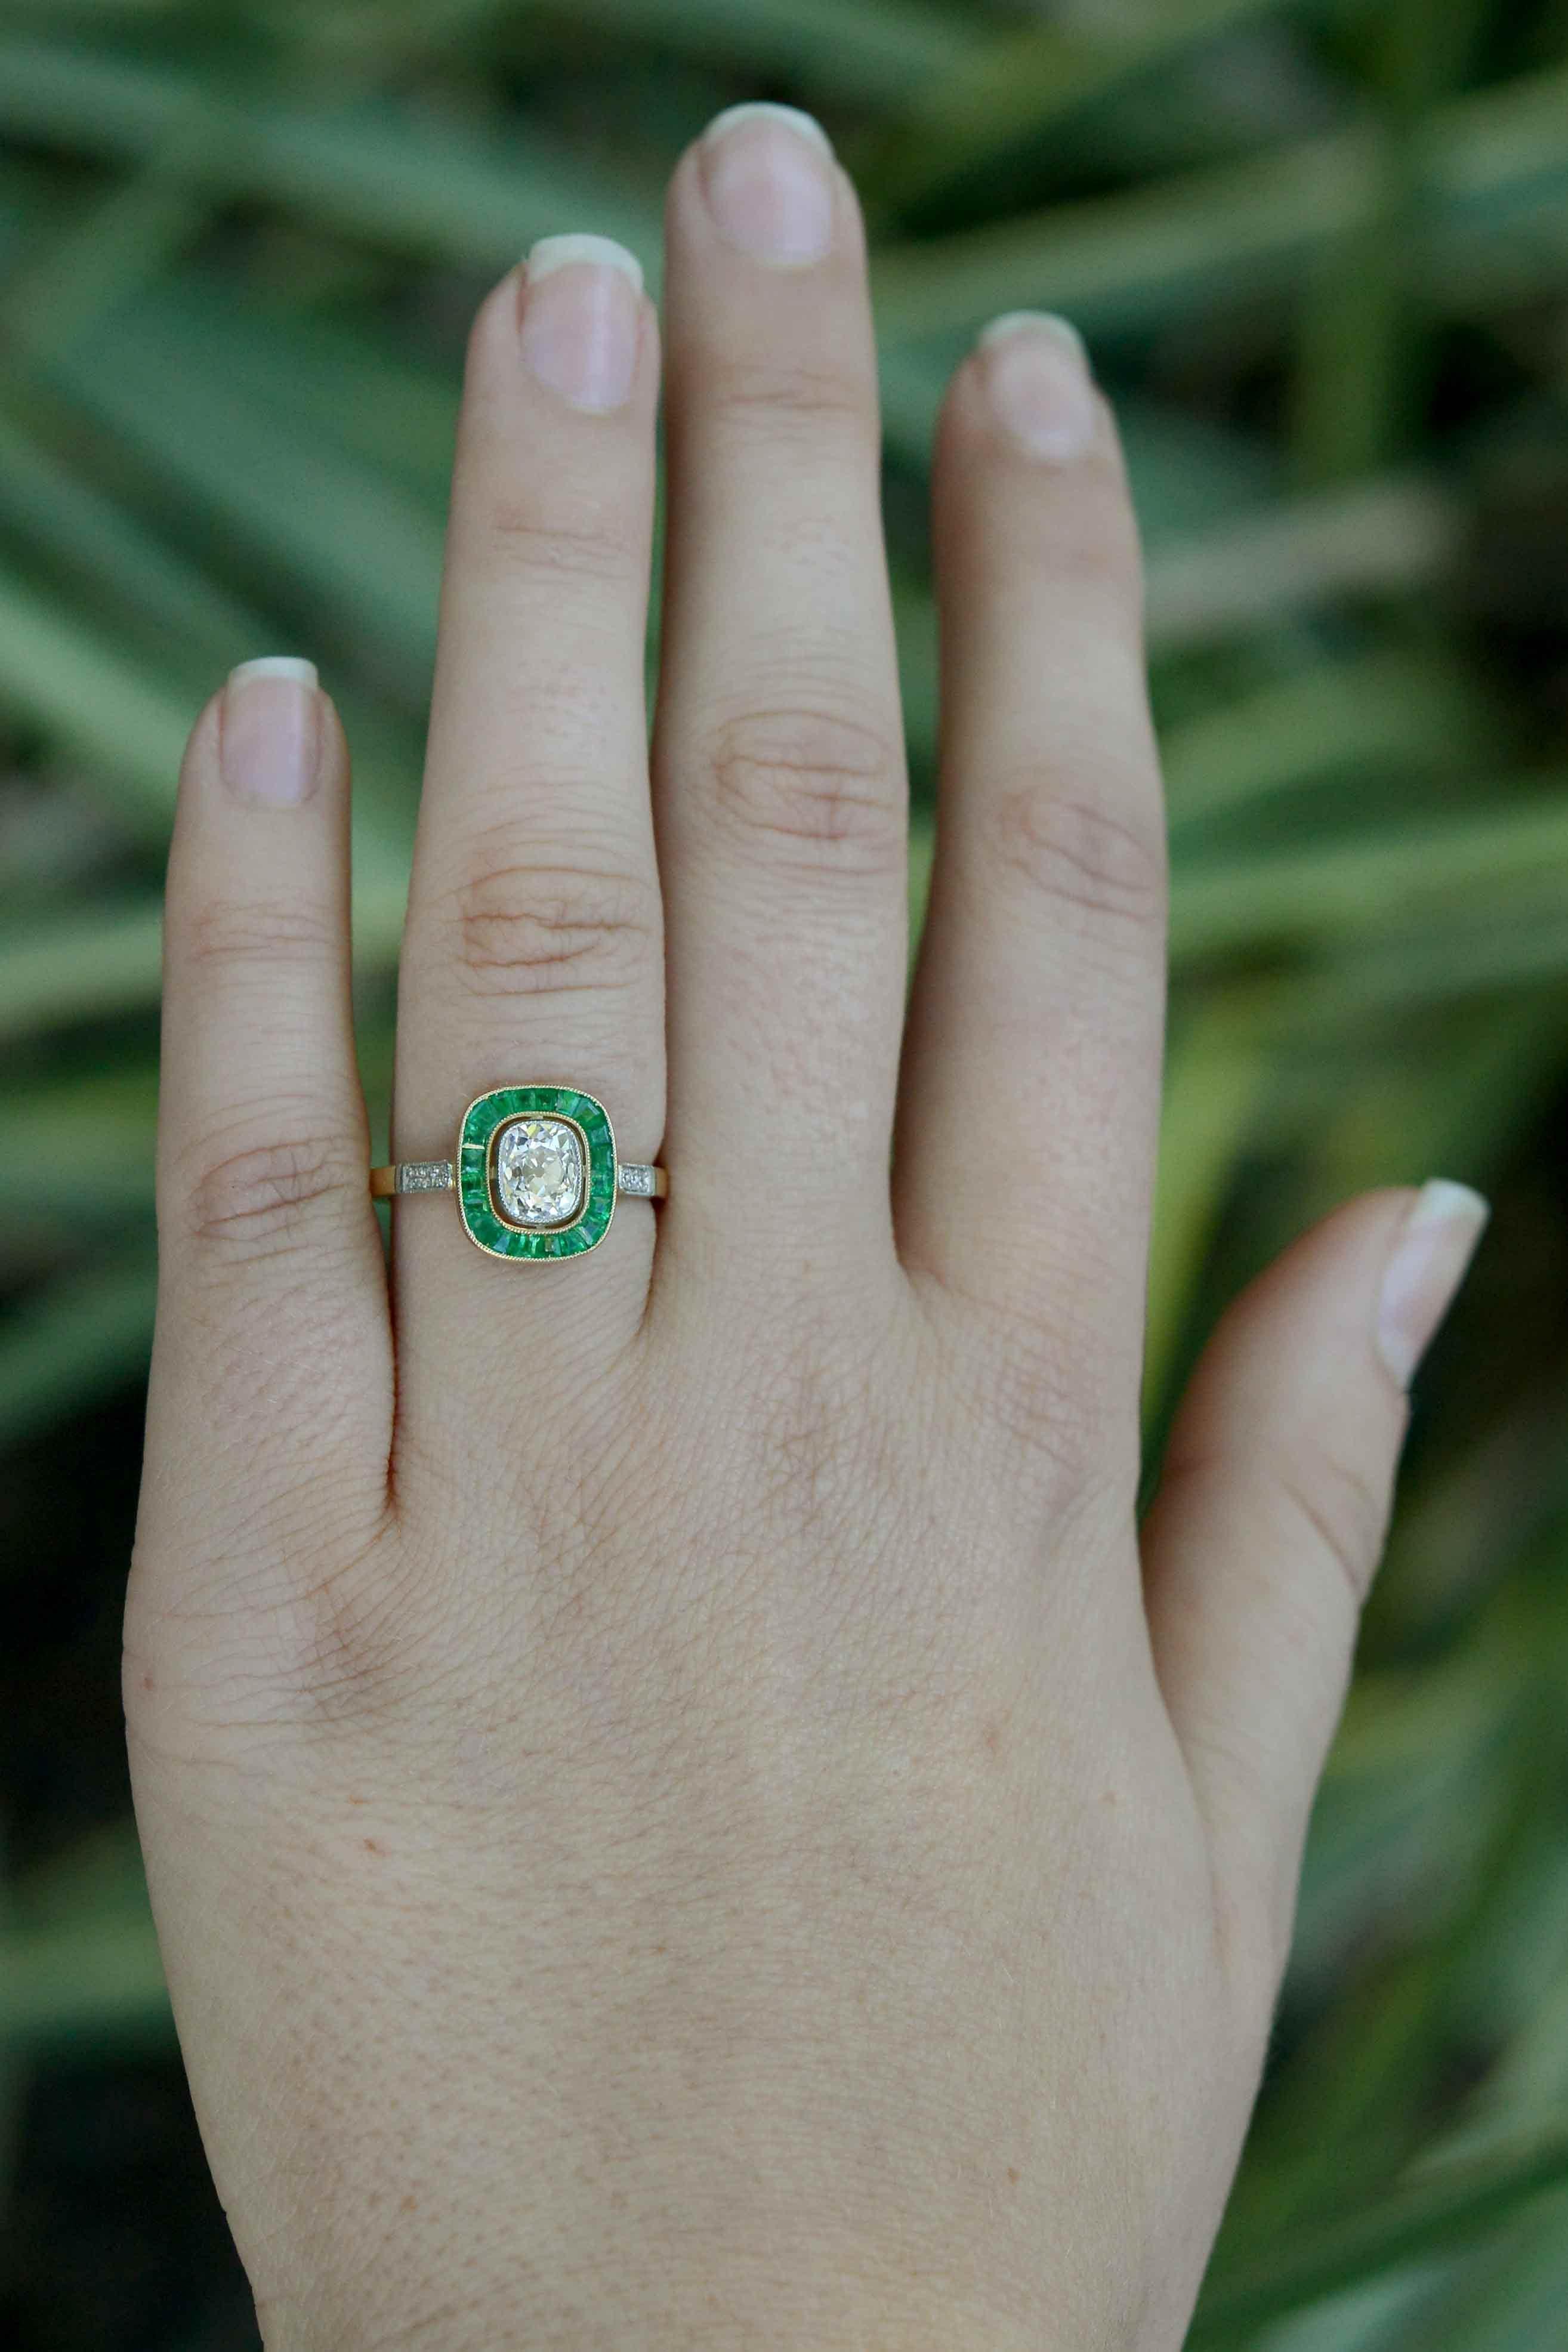 With a breathtaking, glittering old mine cut cushion diamond taking center stage, the French-cut calibre' emerald halo surround really adds the wow factor. Owing its artful flare to the Art Deco era, this lovingly handmade gold and platinum antique